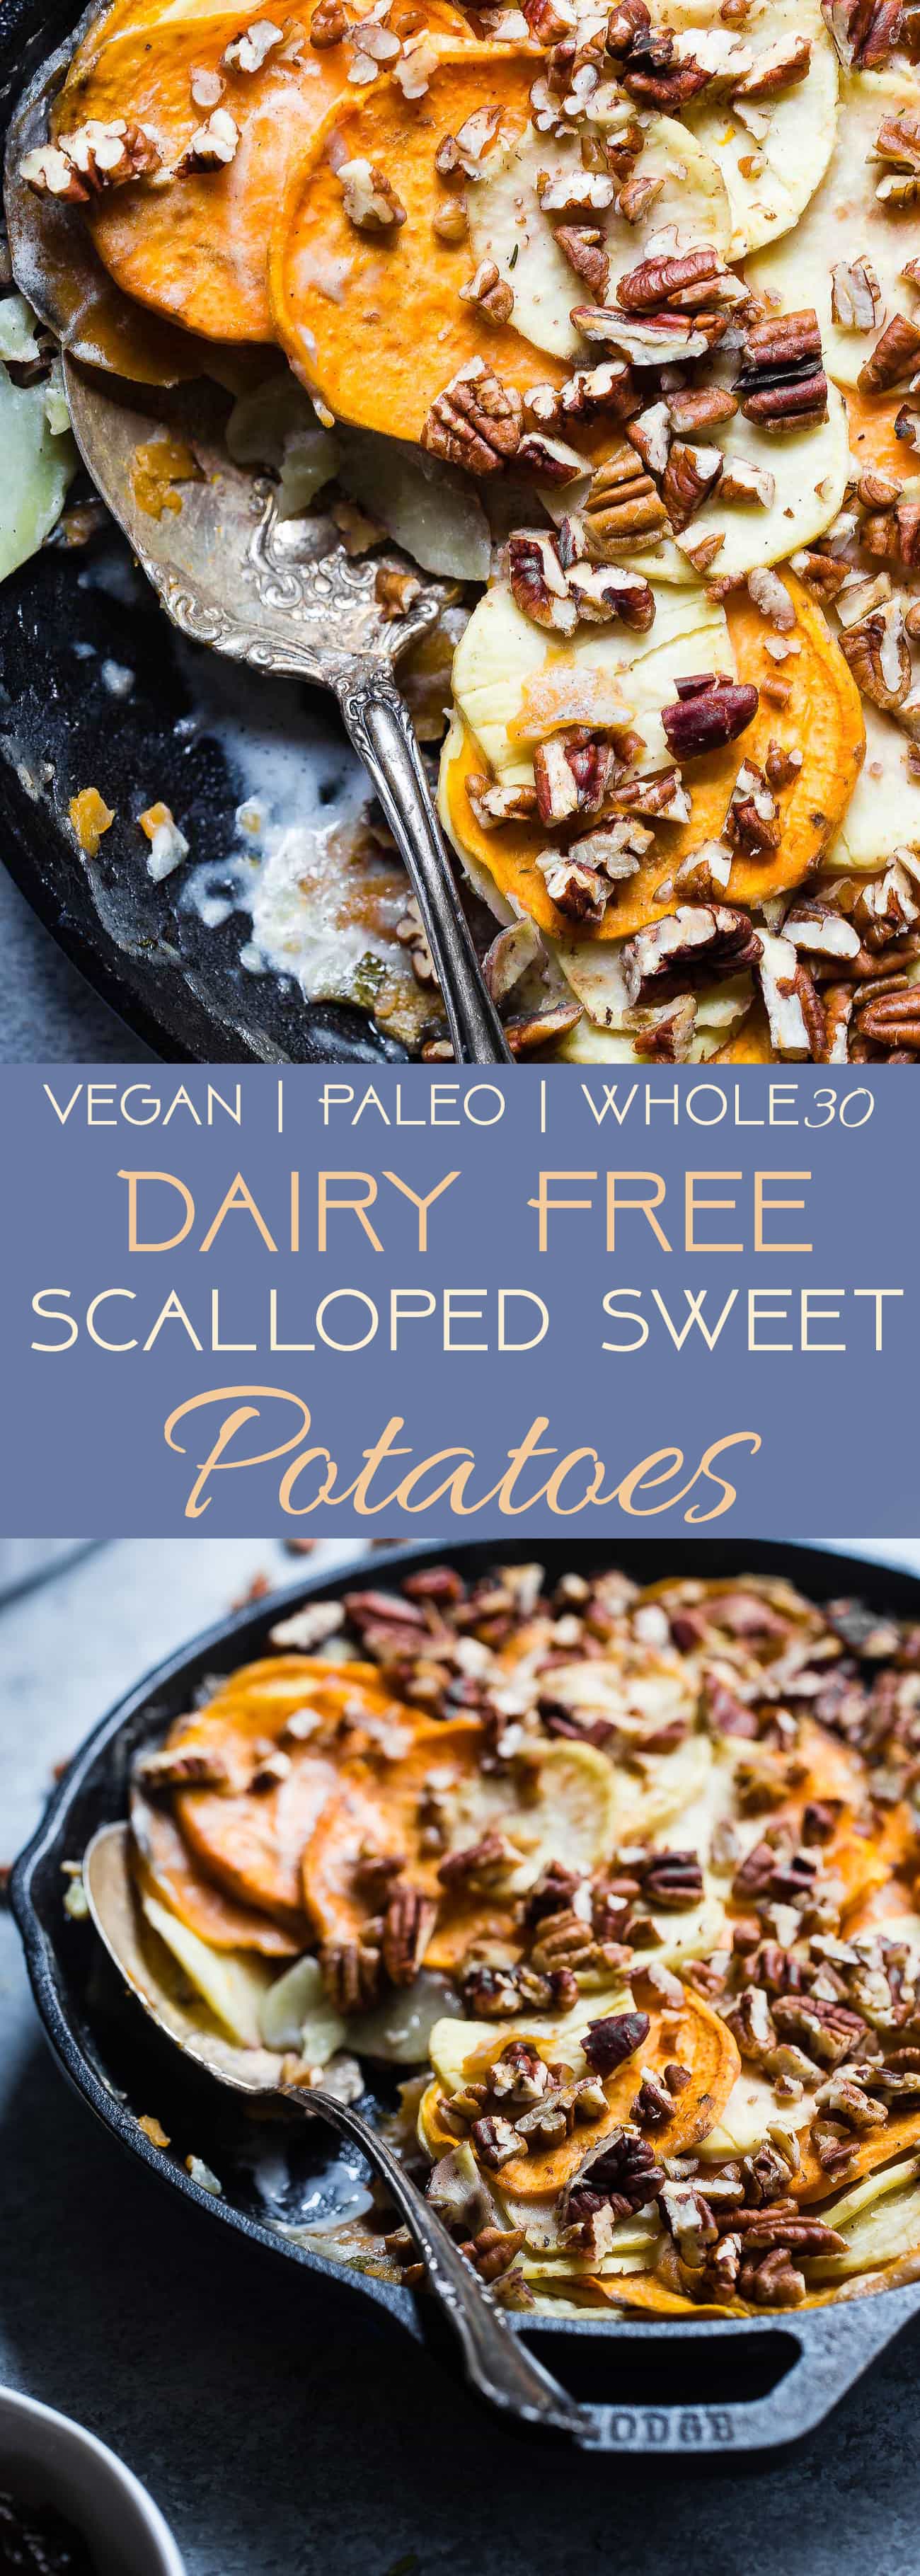 Healthy Scalloped Sweet Potatoes Casserole - So rich and creamy, you will never believe it's gluten free and paleo/vegan/whole30 compliant! Perfect for a healthy Thanksgiving! | Foodfaithfitness.com | @FoodFaithFit | paleo scalloped sweet potatoes. Vegan scalloped sweet potatoes. whole30 scalloped sweet potatoes. dairy free scalloped sweet potatoes. coconut milk scalloped sweet potatoes. healthy thanksgiving recipes. thanksgiving side dish recipes. sweet potato thanksgiving recipes. paleo thanksgiving recipes. vegan thanksgiving recipes.